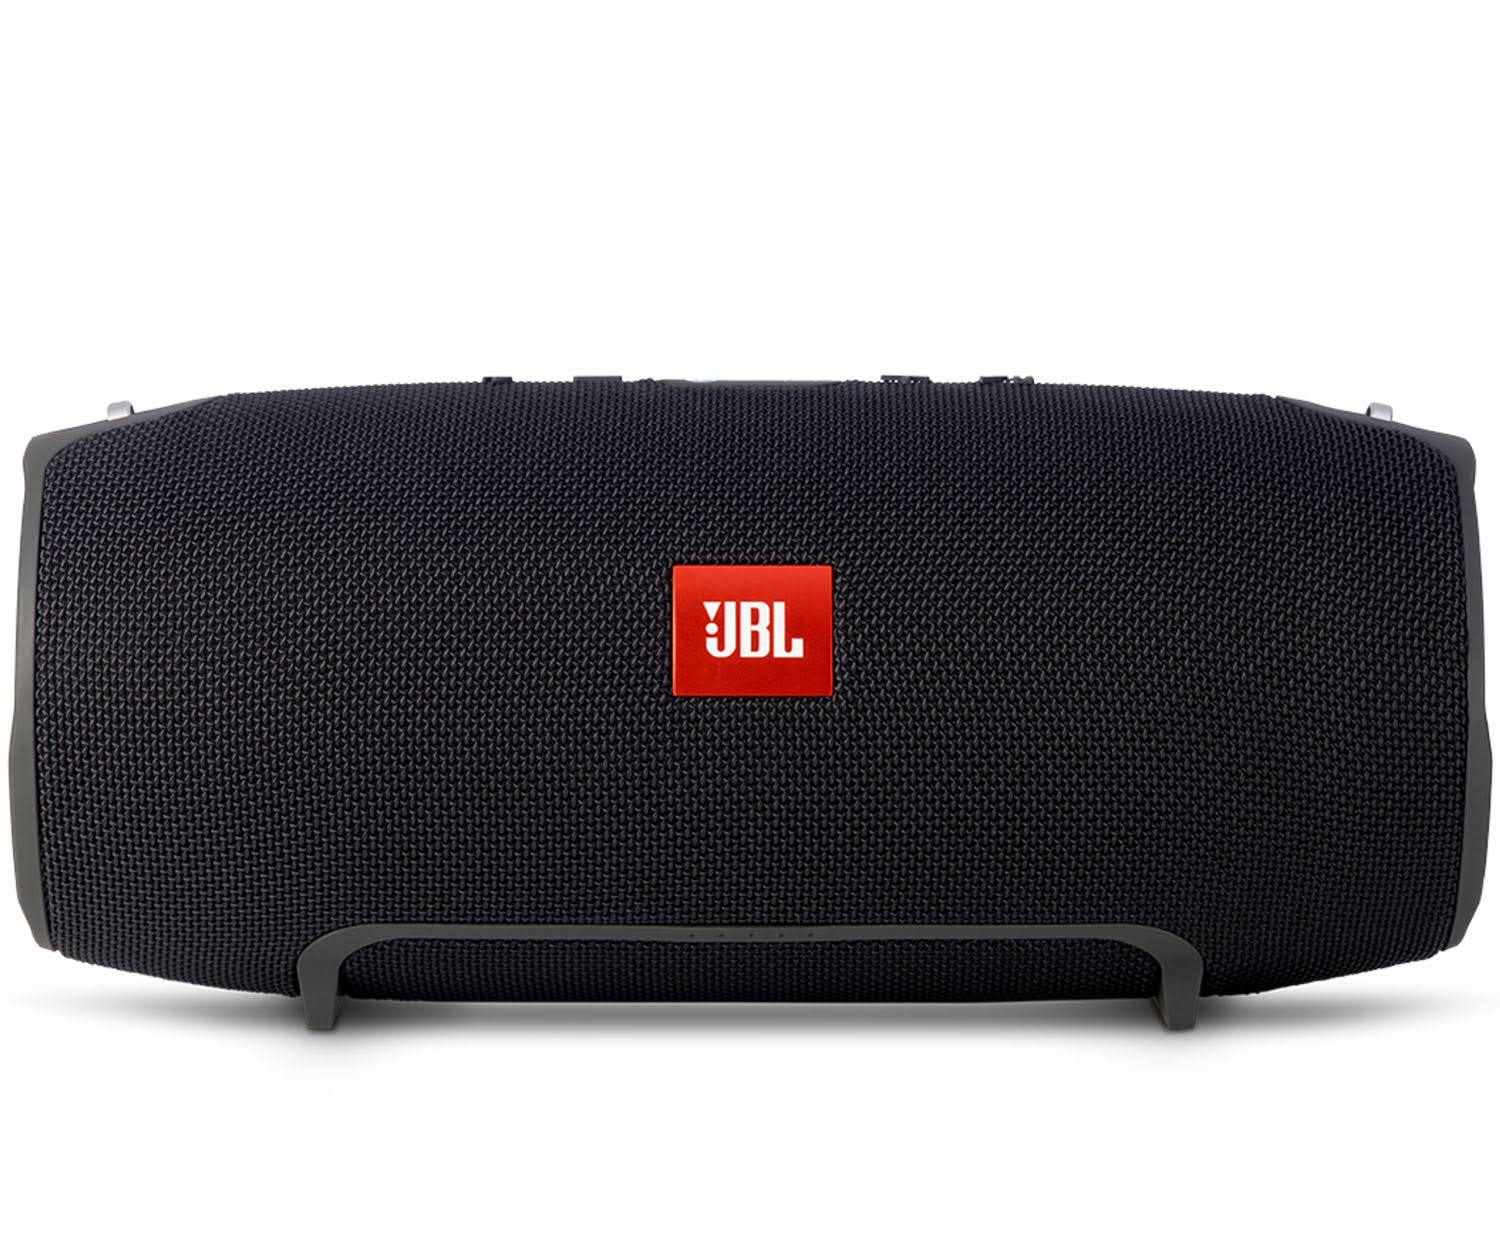 Getting Fit JBL Xtreme Portable Wireless Bluetooth Spea...